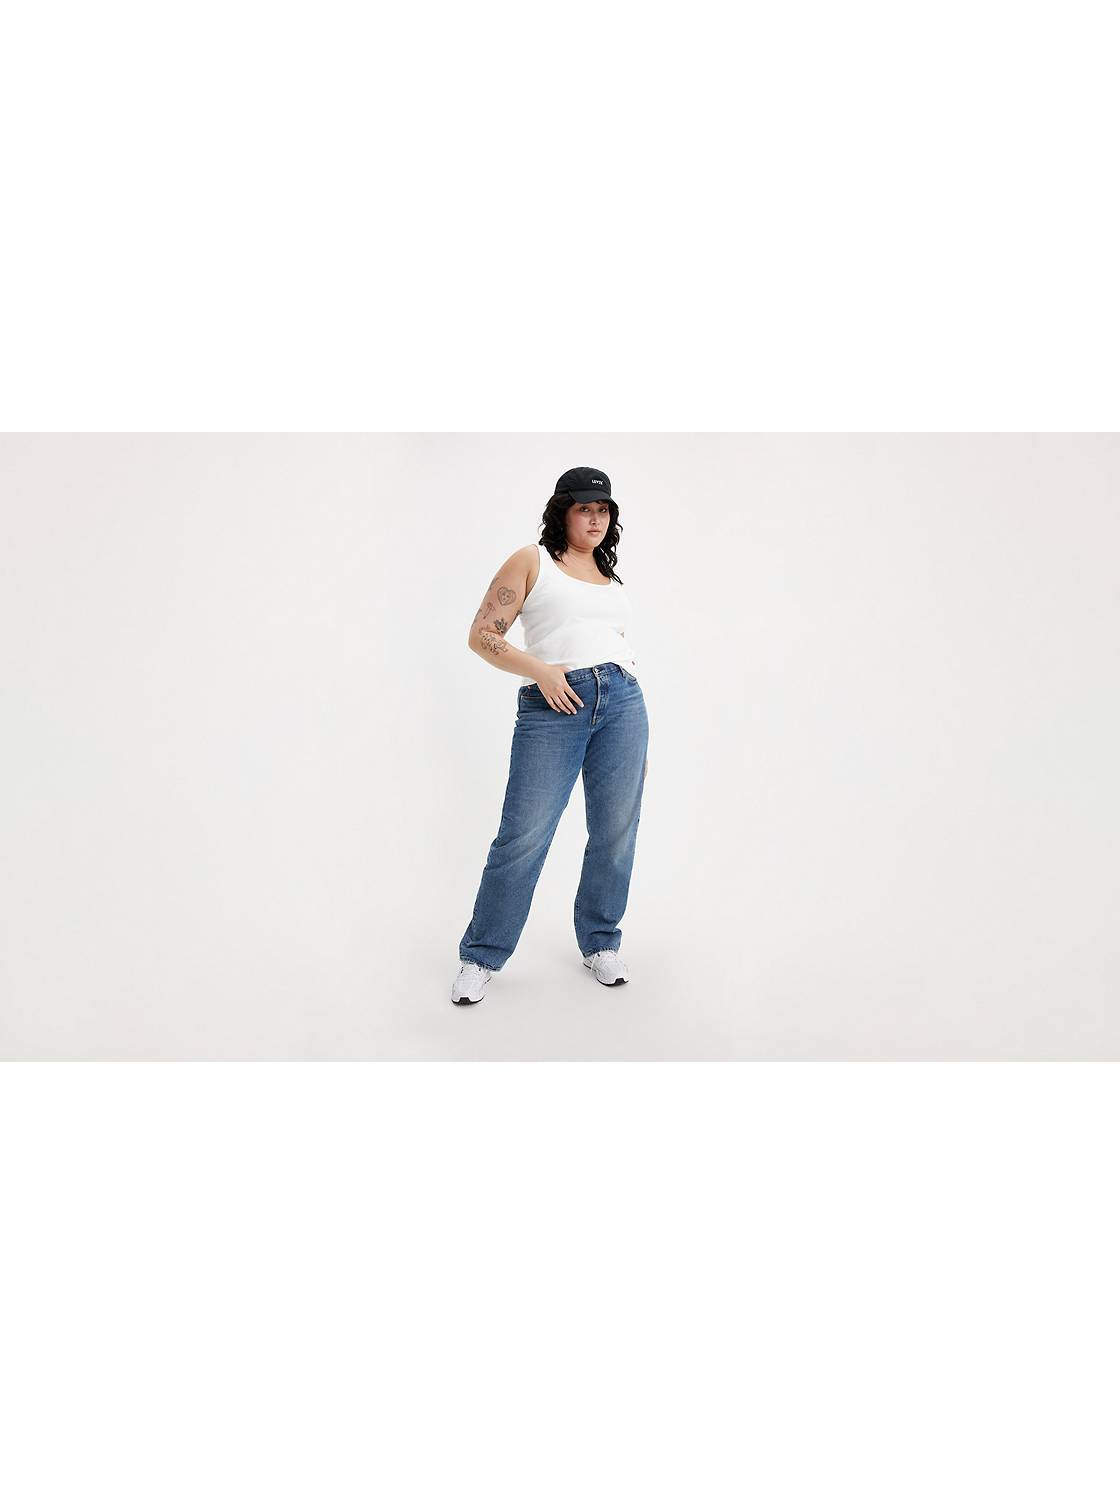 Levi's 501® Jeans for Women - The Original Button Fly